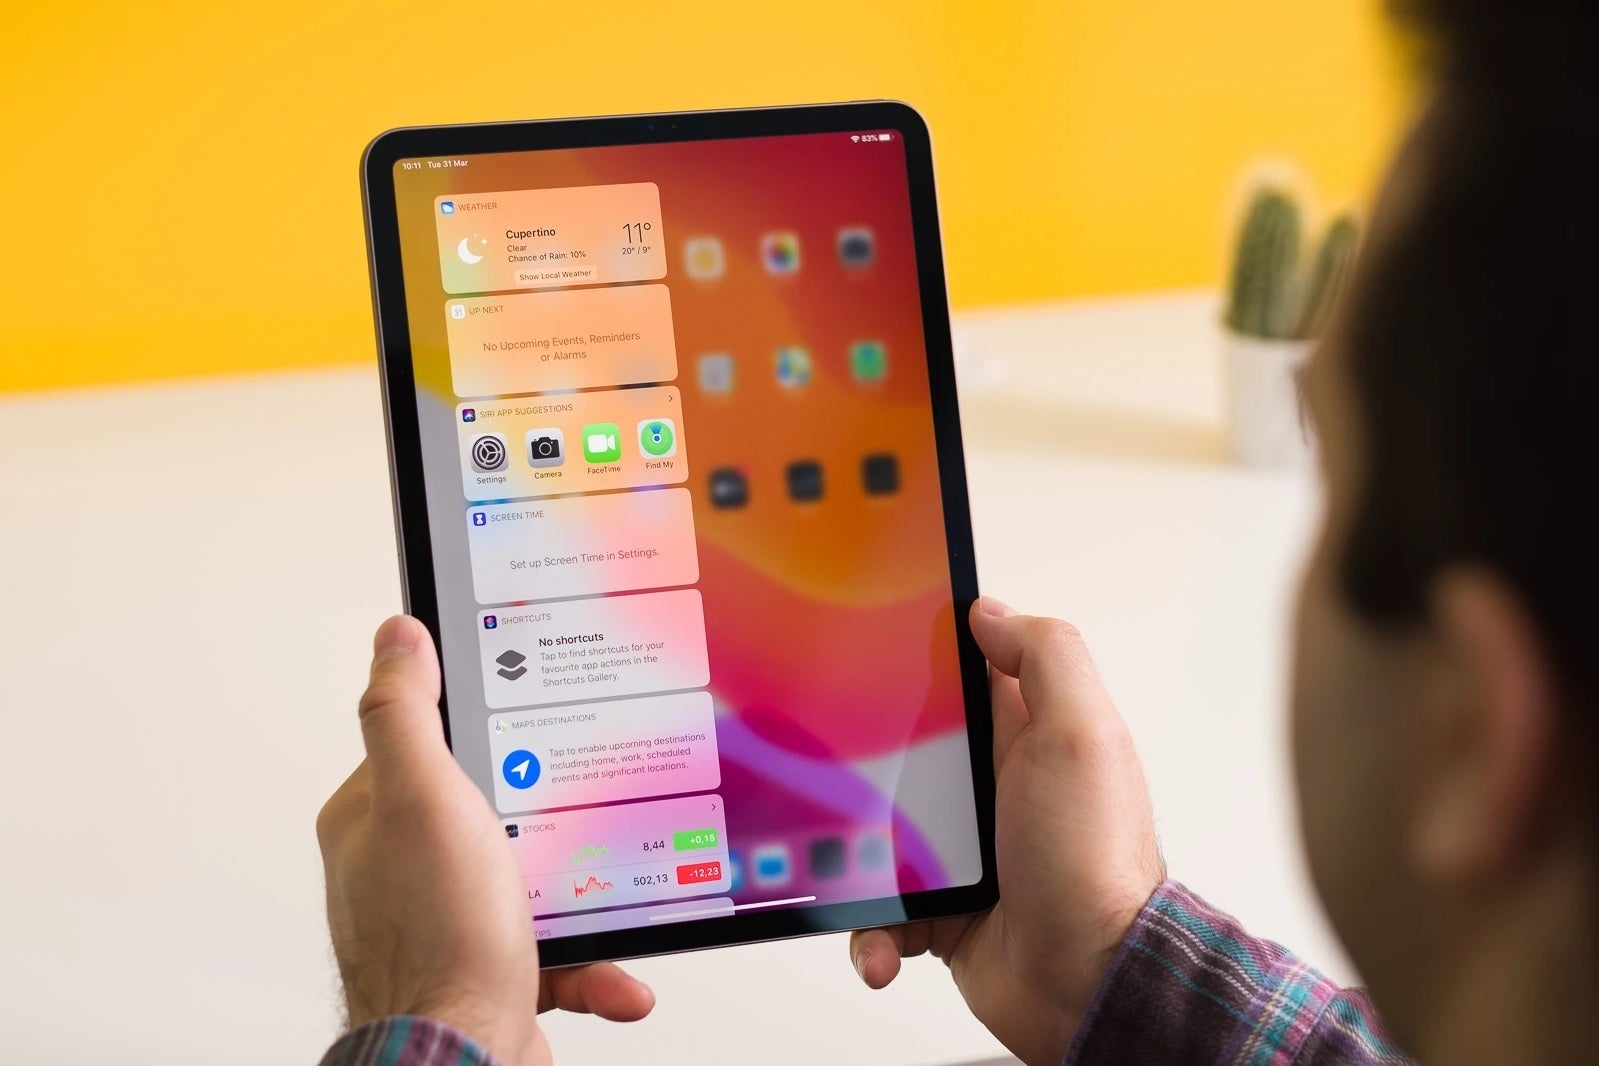 LG Display will reportedly supply Apple with Mini LED LCD panels for new iPad Pro units - Report: 5G Apple iPad Pro coming next quarter with improved display technology